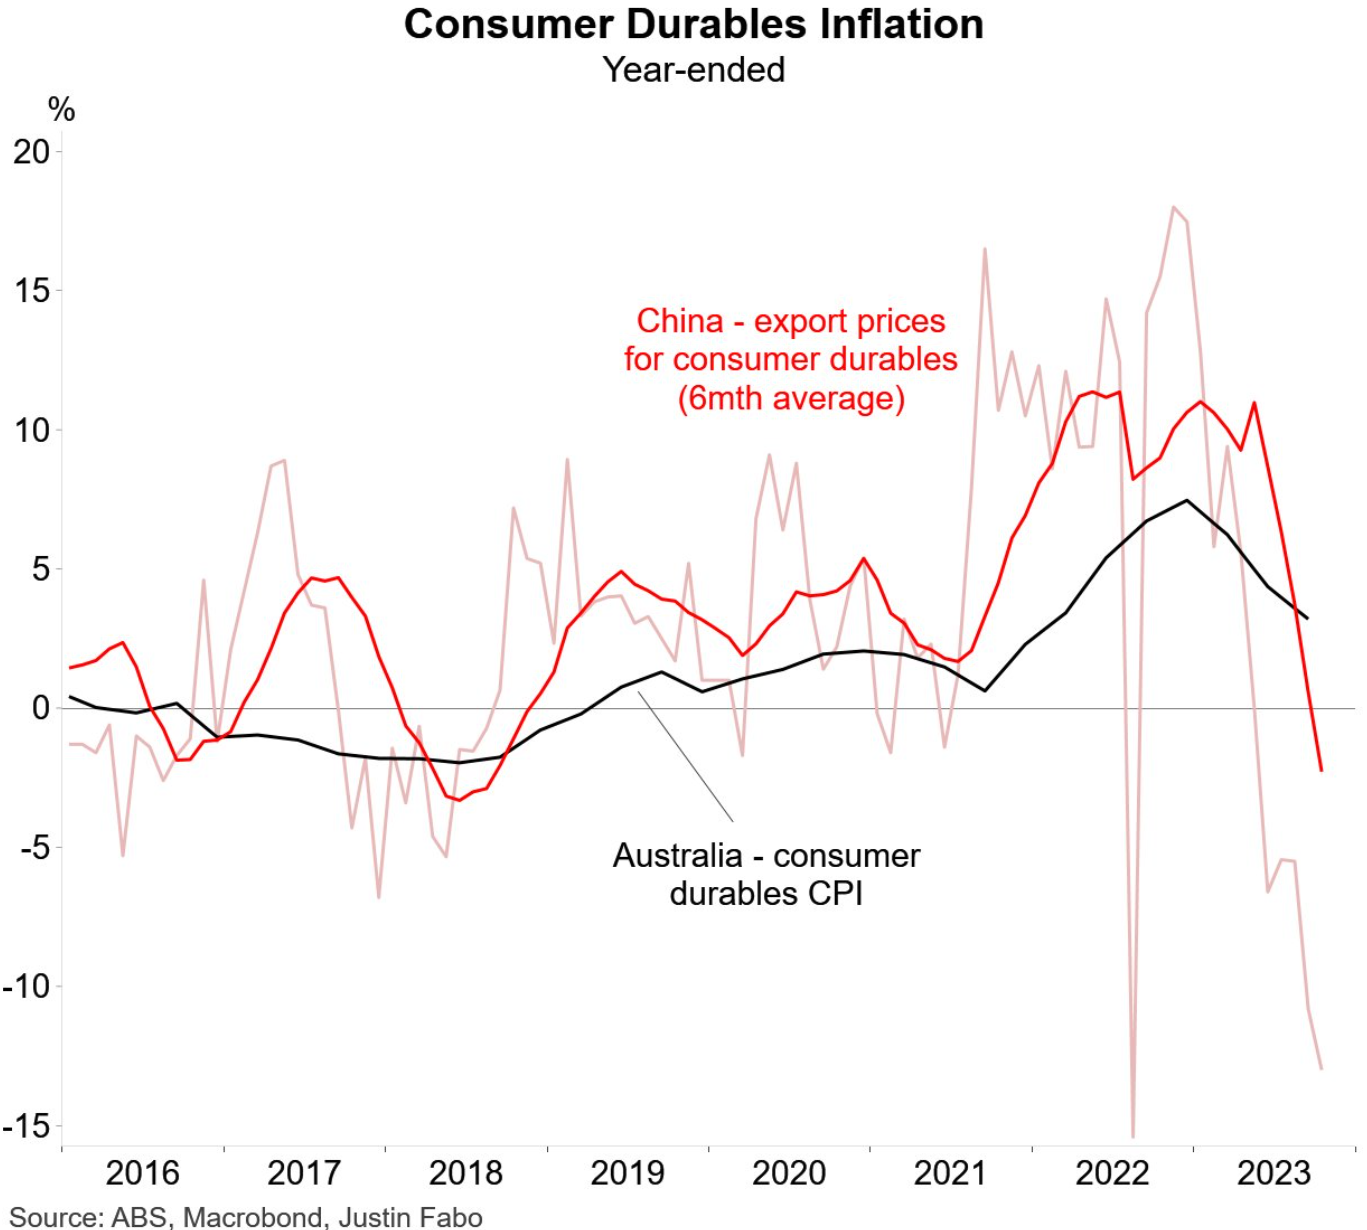 Consumer durables inflation